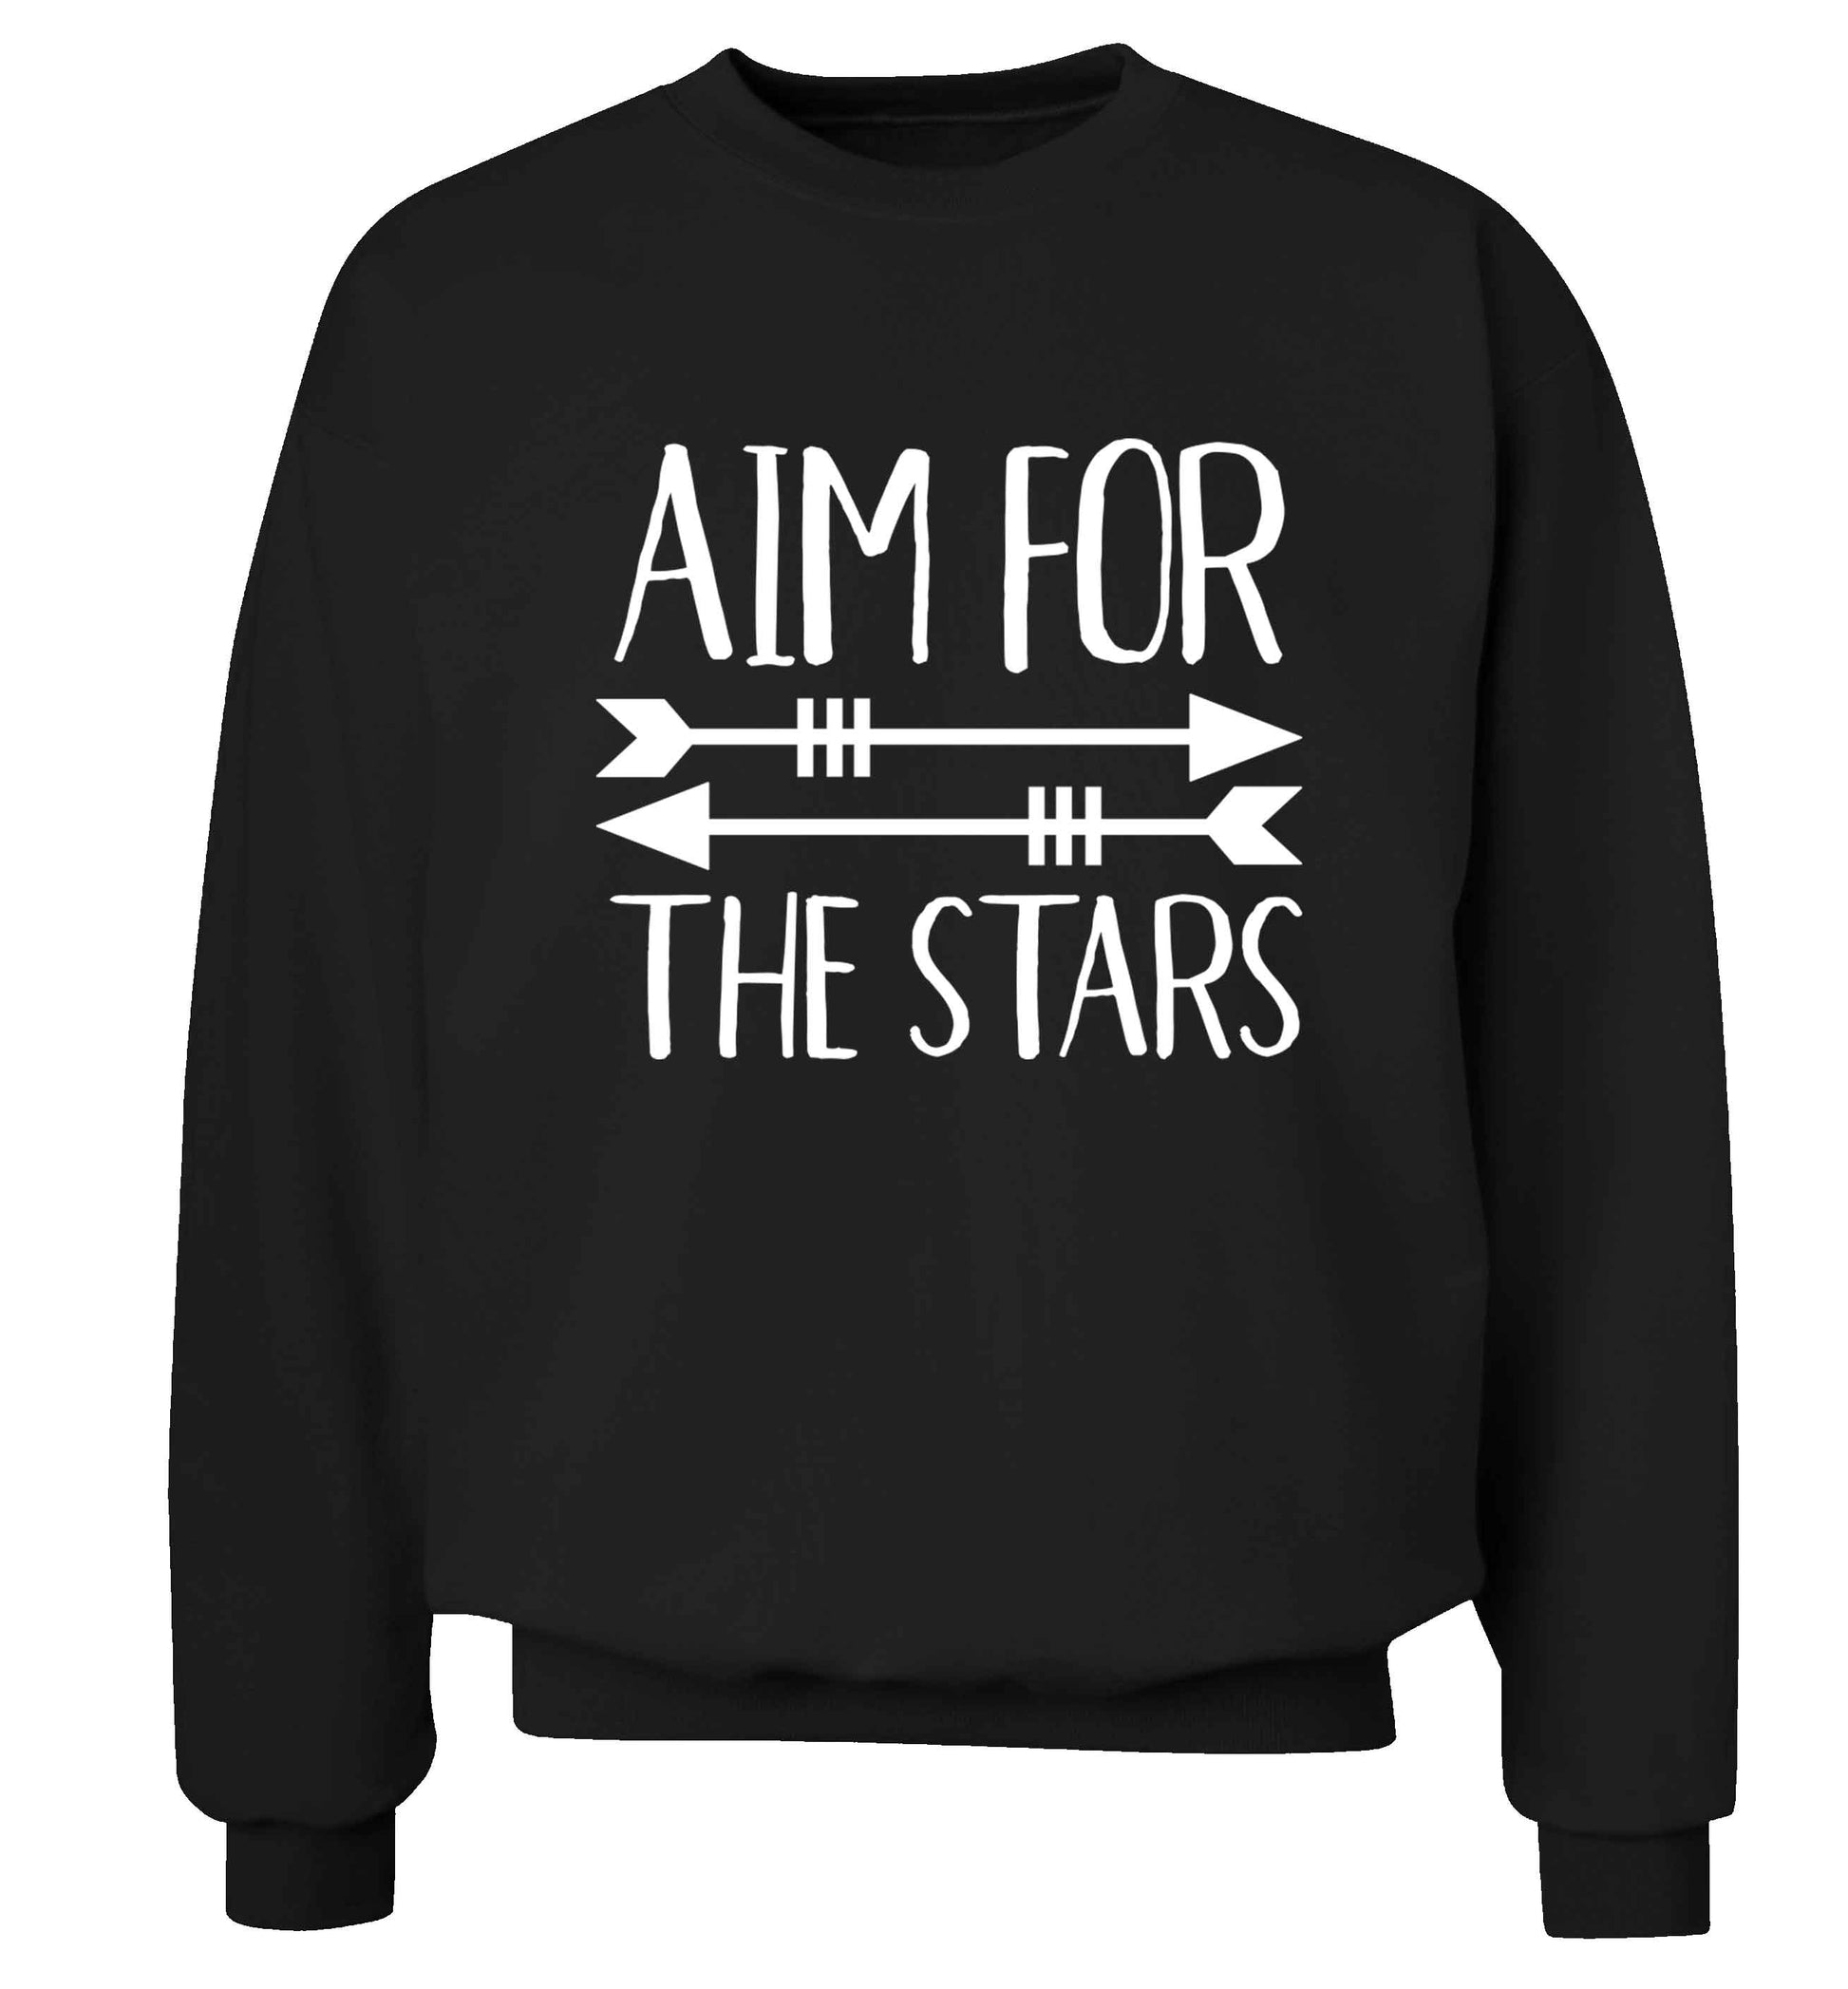 Aim for the stars Adult's unisex black Sweater 2XL